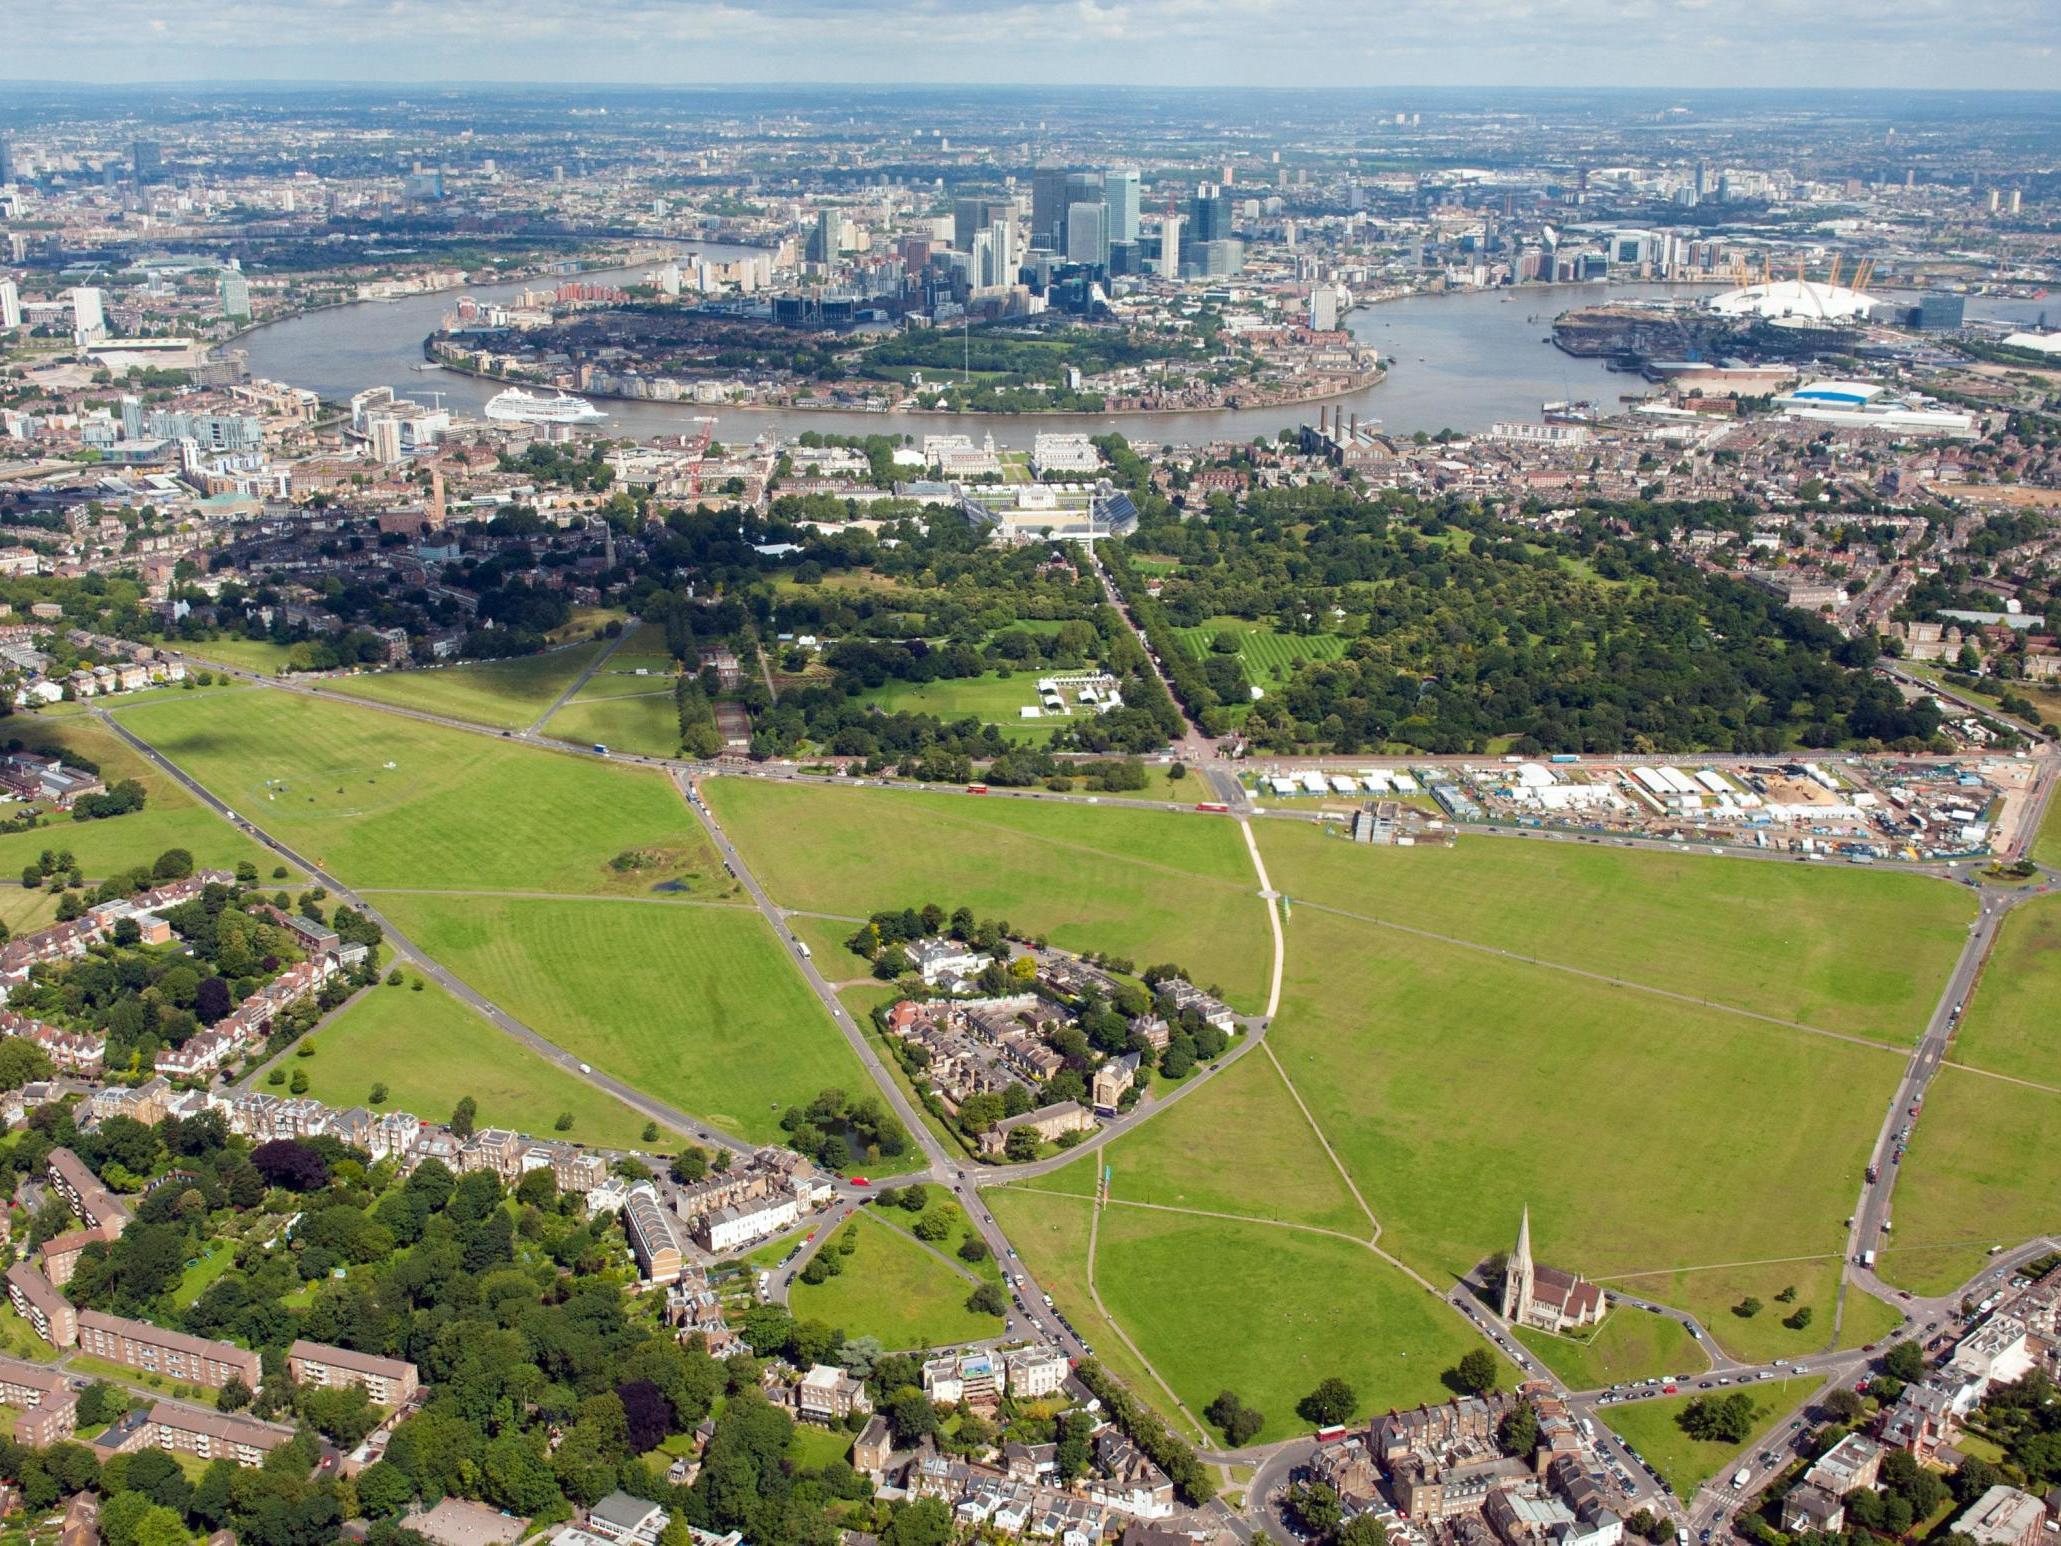 A man was strangled unconscious in a homophobic attack in Blackheath Common, southeast London